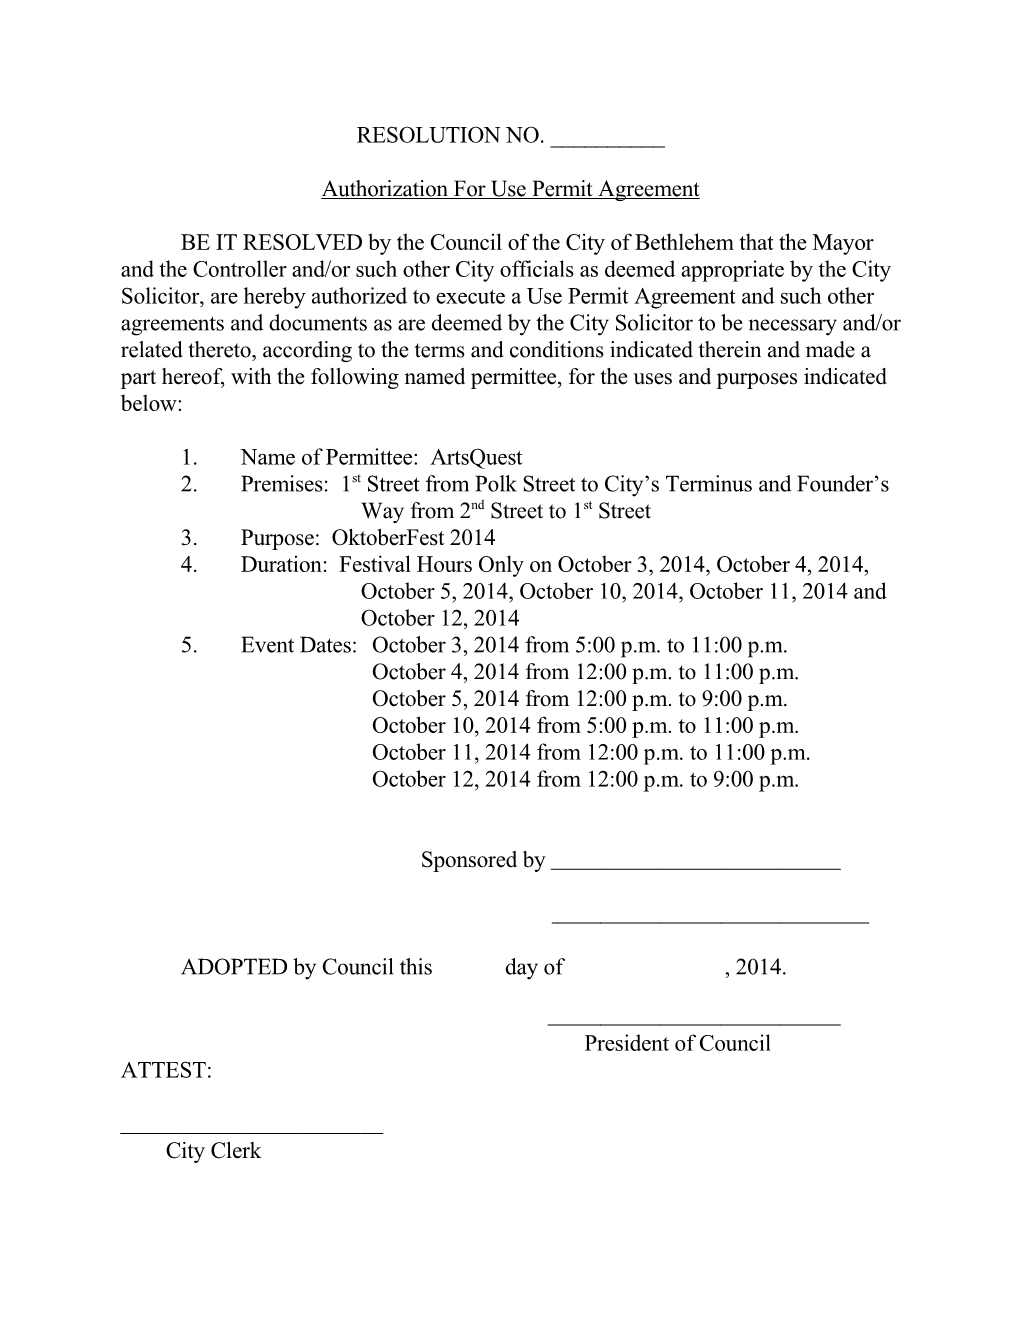 Authorization for Use Permit Agreement